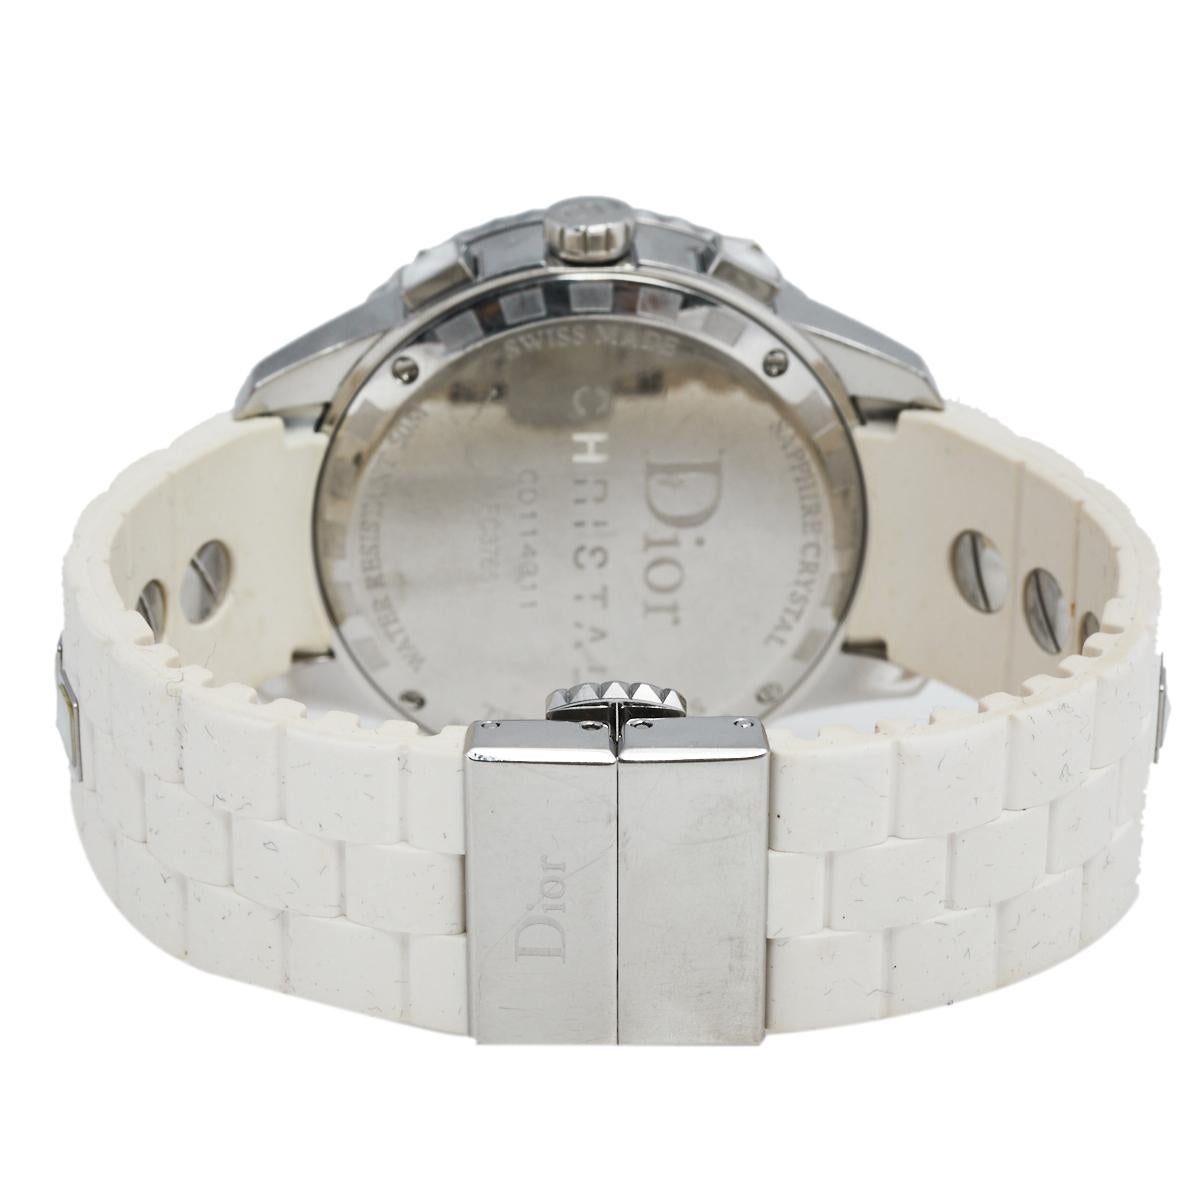 Here's a timepiece that will not only assist you with the correct time but also elevate your style quotient. This Dior watch is from their Christal collection, and it is Swiss-made. It has a stylish stainless steel case of diameter 38 mm with an